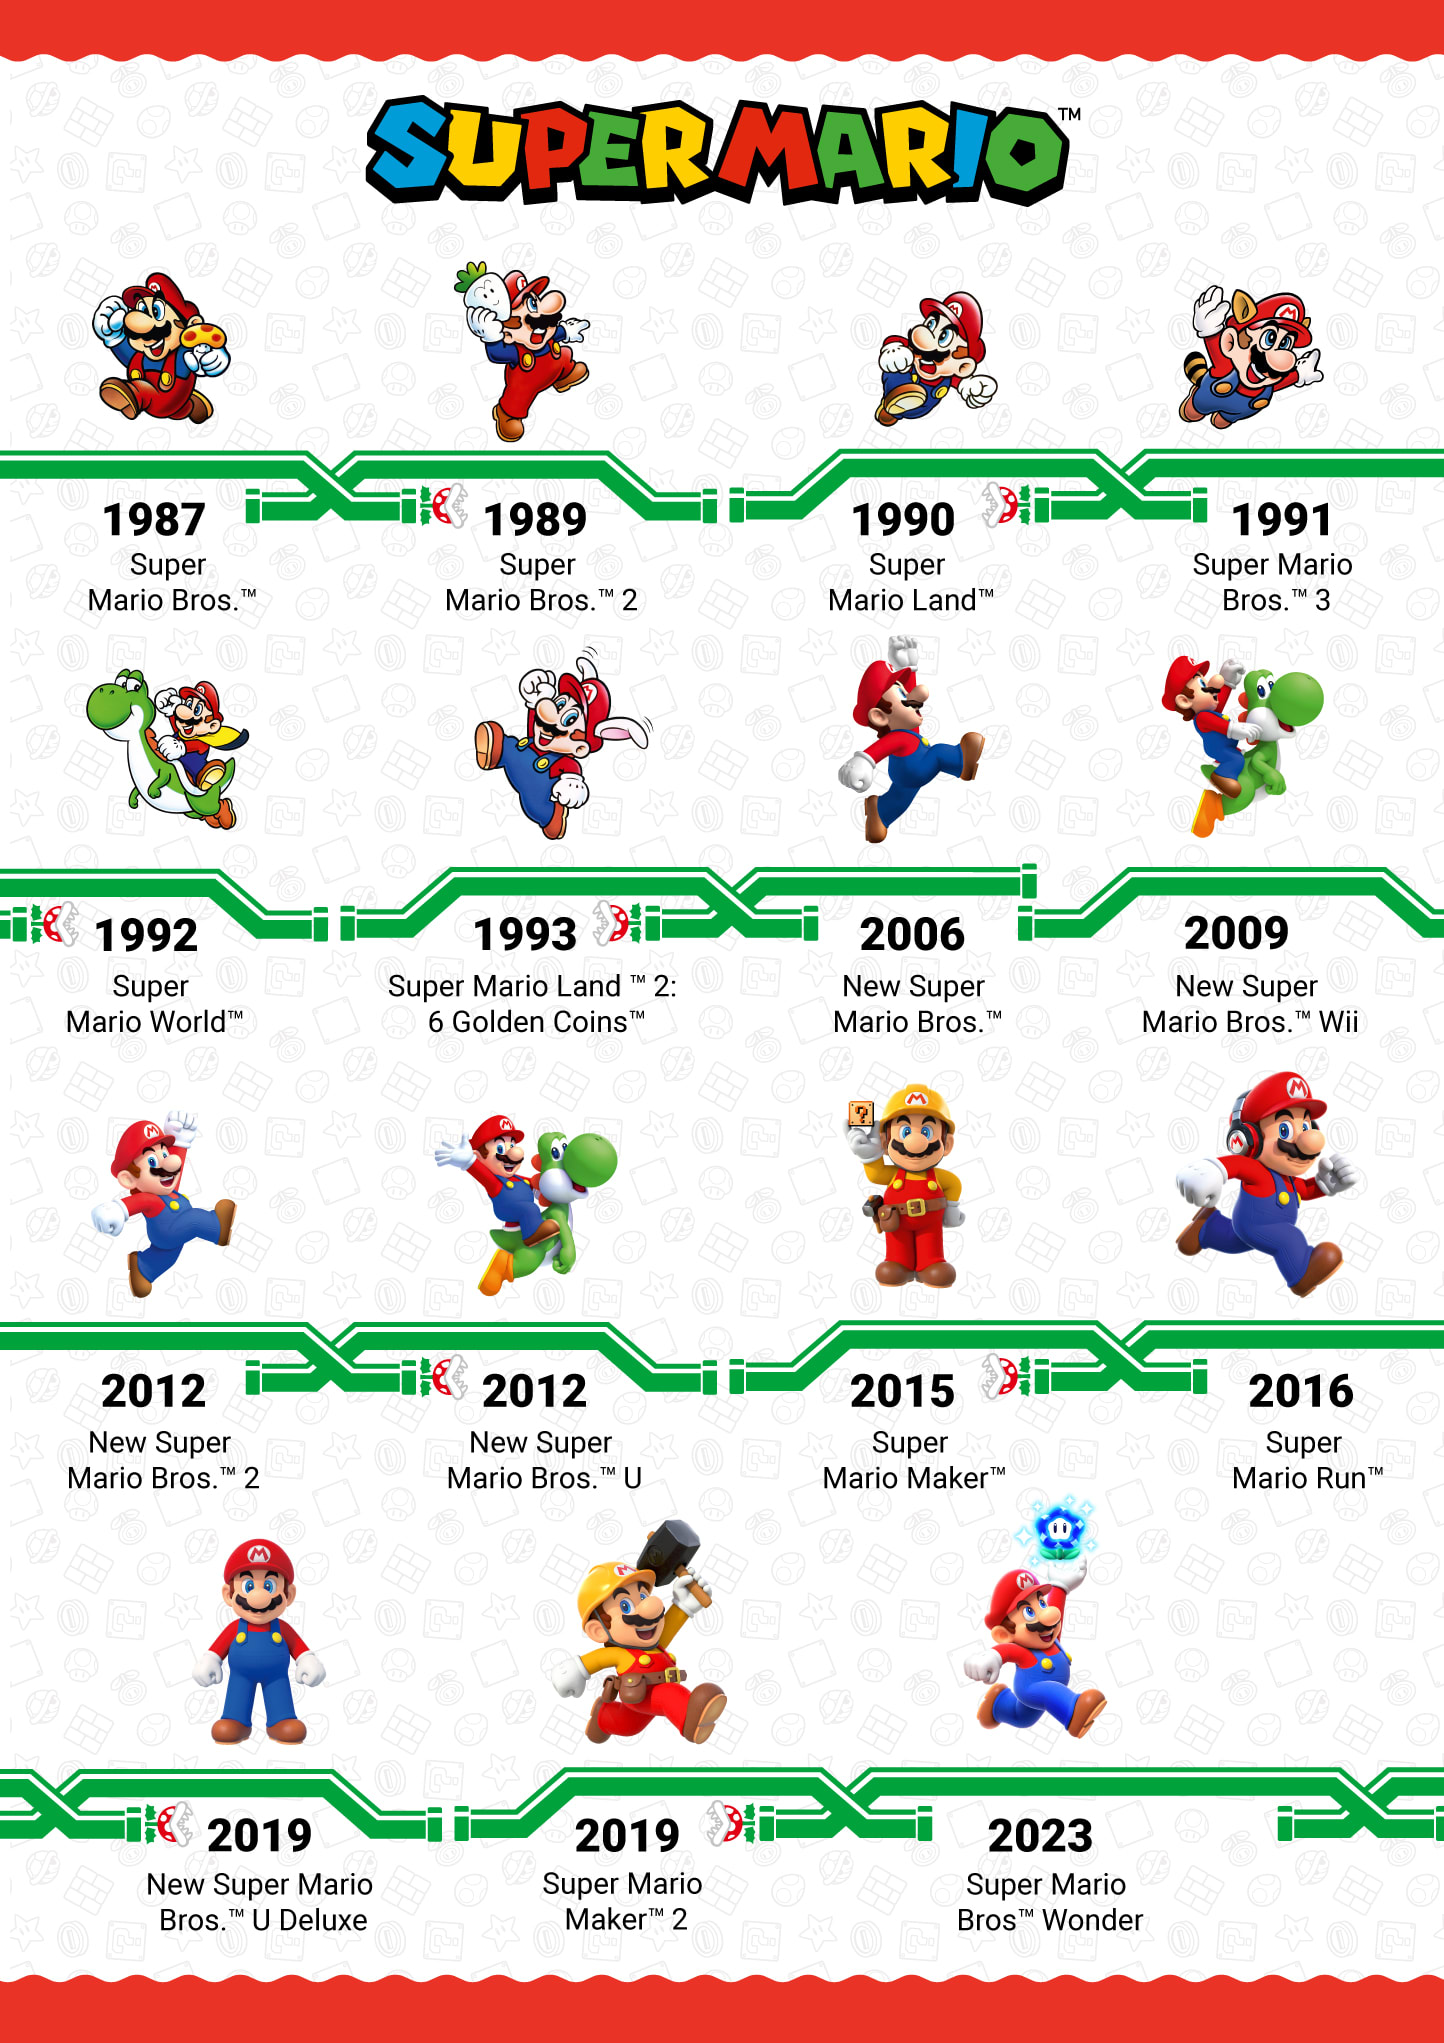 Classic 2D Super Mario Platformers throughout the ages! Image Timeline